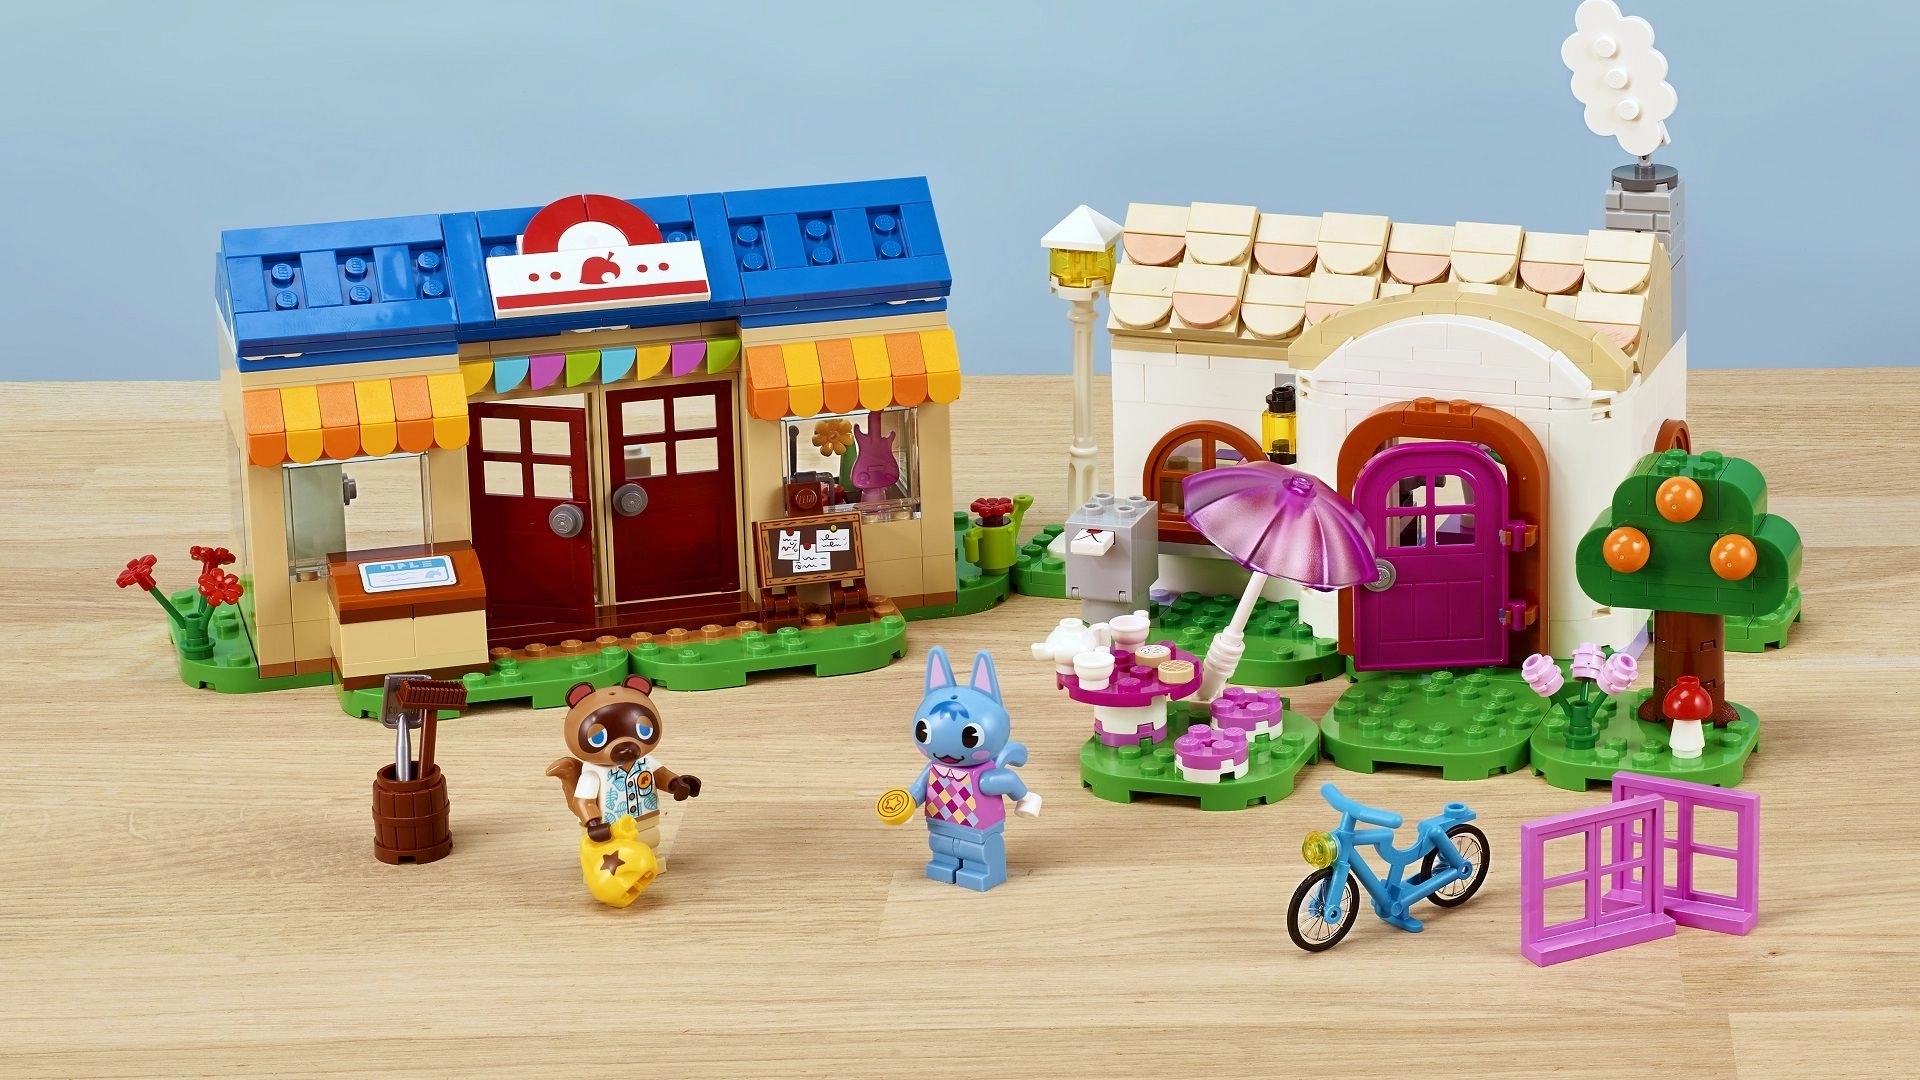 Lego Teams Up with Animal Crossing: Pure Genius Mix!